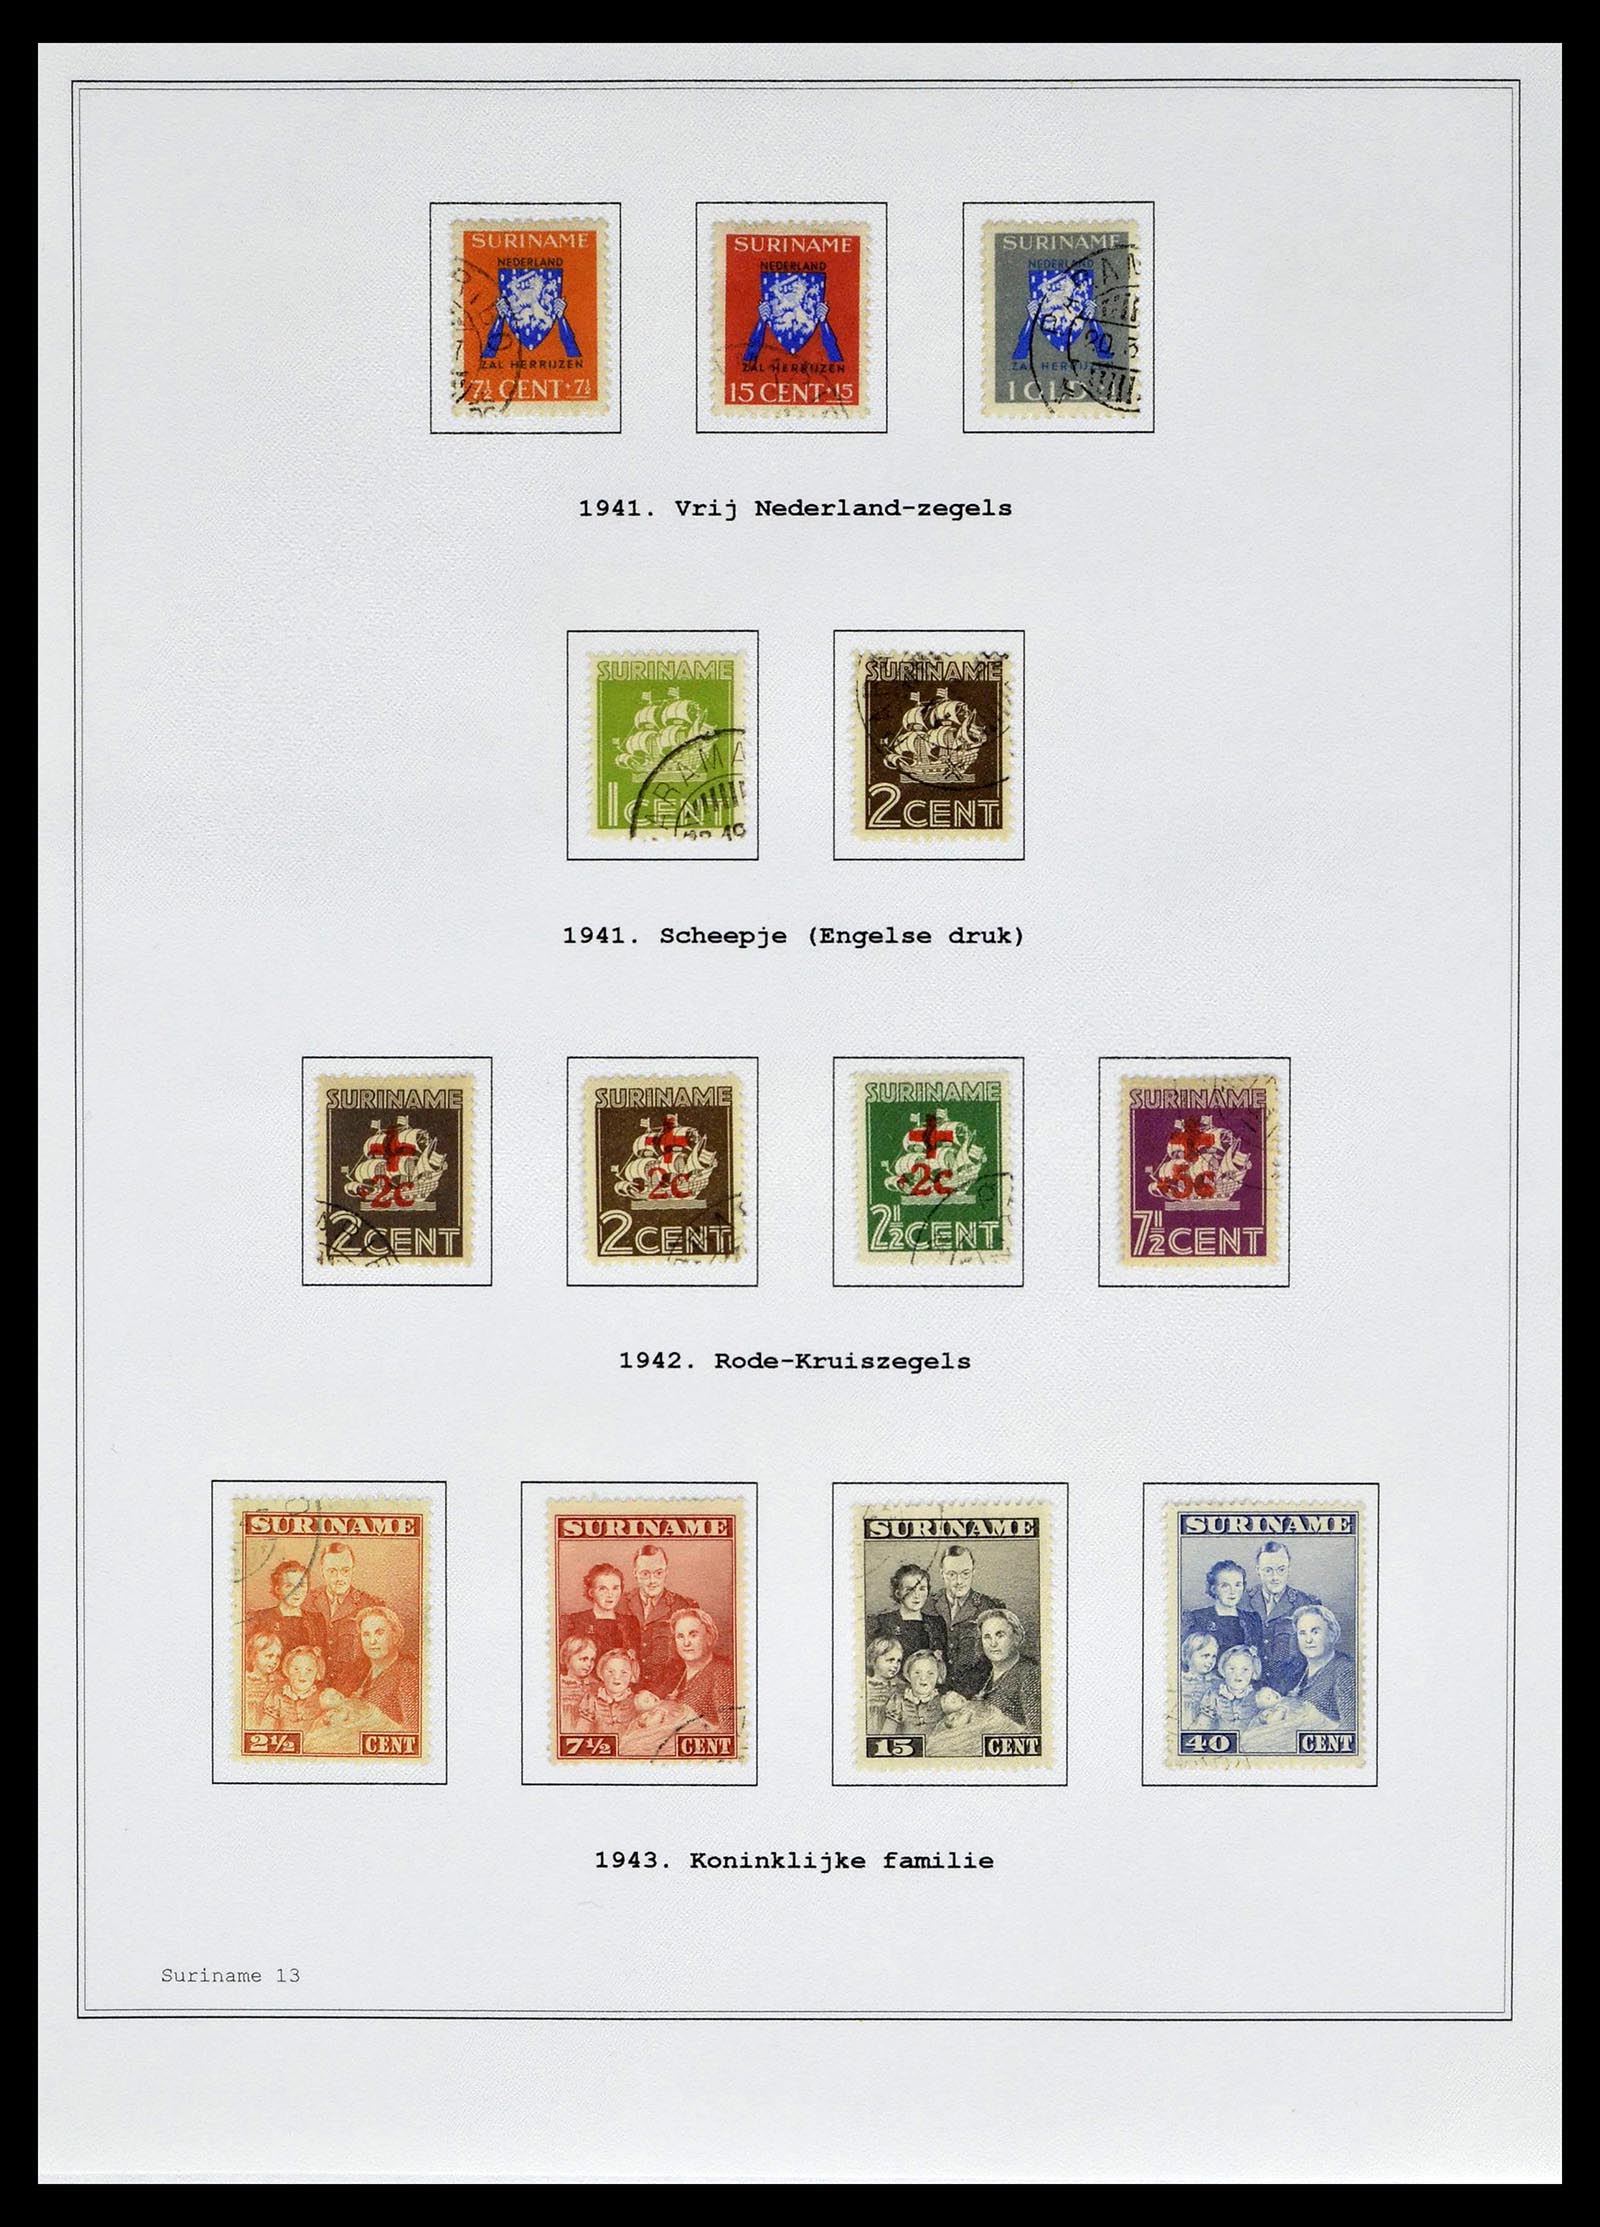 39026 0124 - Stamp collection 39026 Dutch east Indies and Suriname 1864-1975.